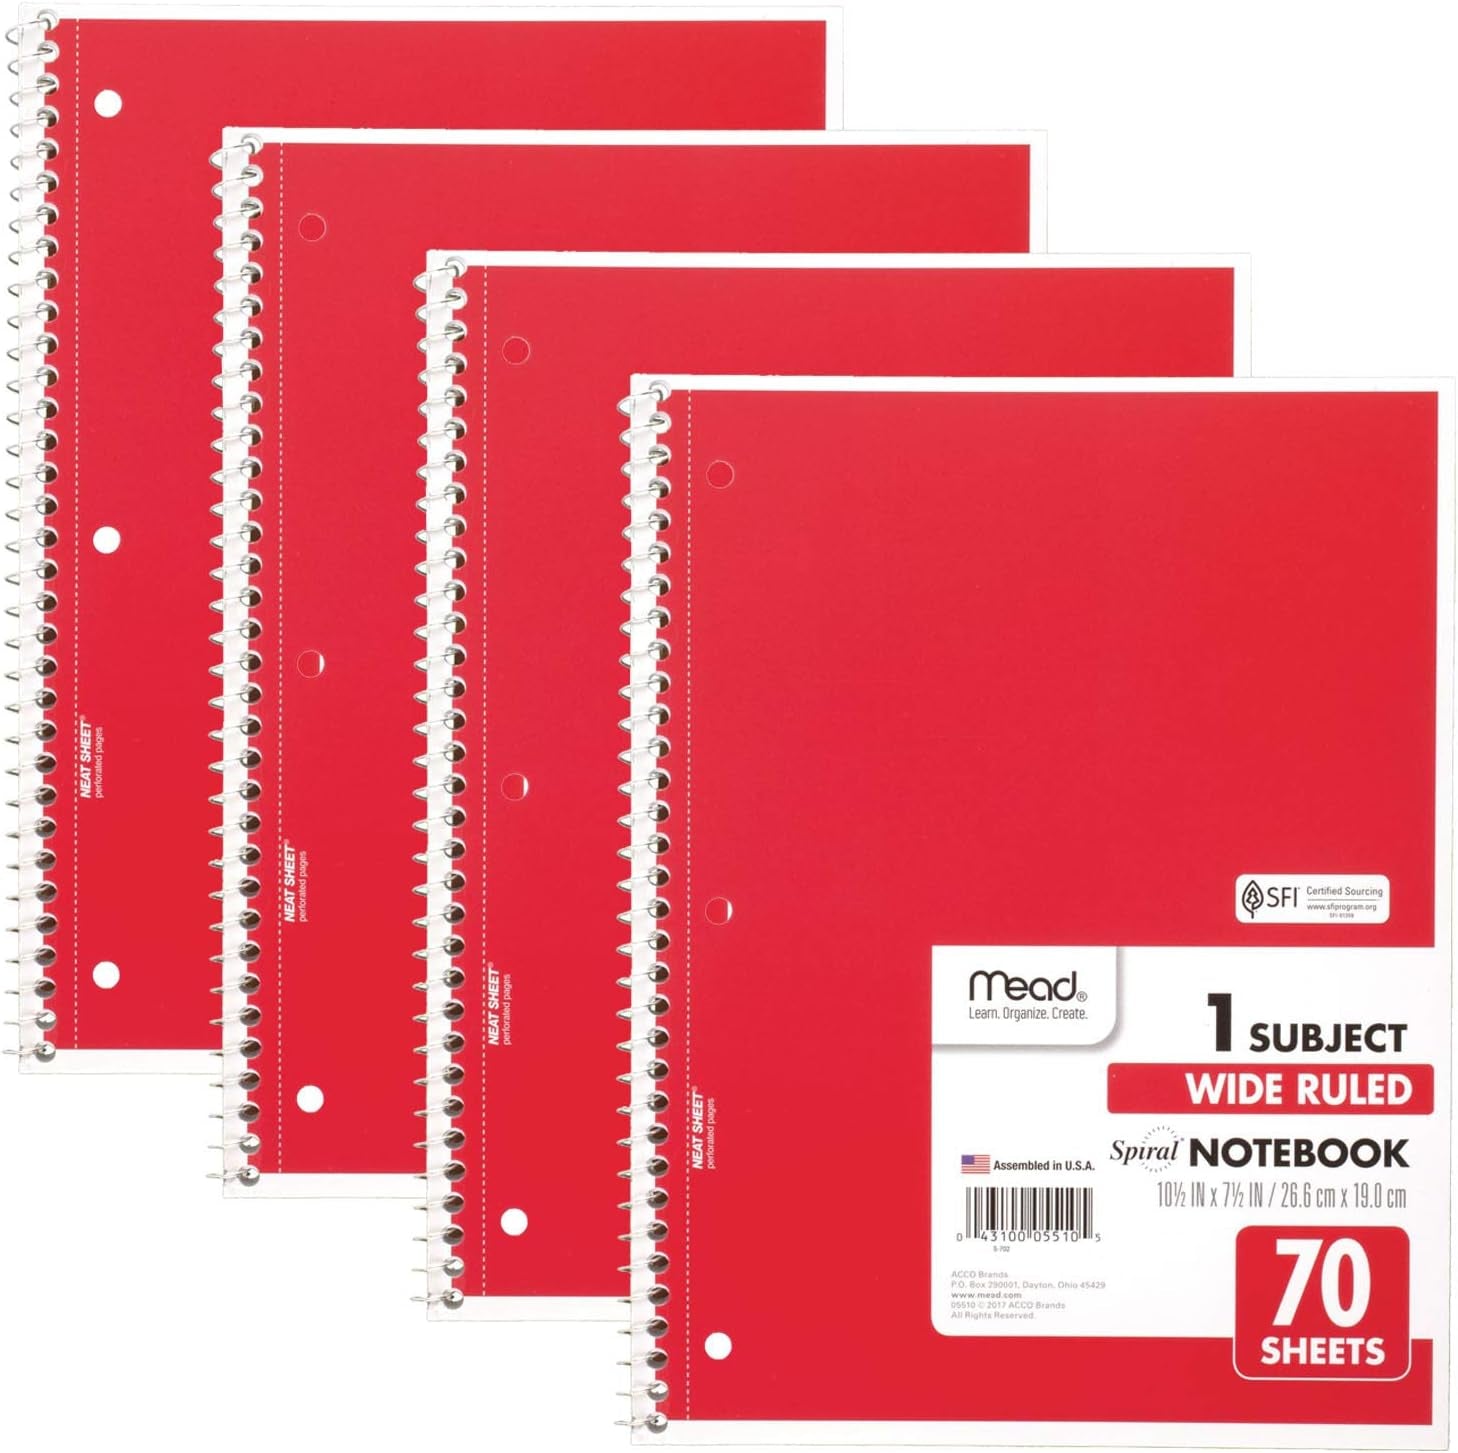 Spiral Notebook, 4 Pack, 1-Subject, Wide Ruled Paper, 7-1/2" X 10-1/2", 70 Sheets per Notebook, Colors Will Vary (72873)